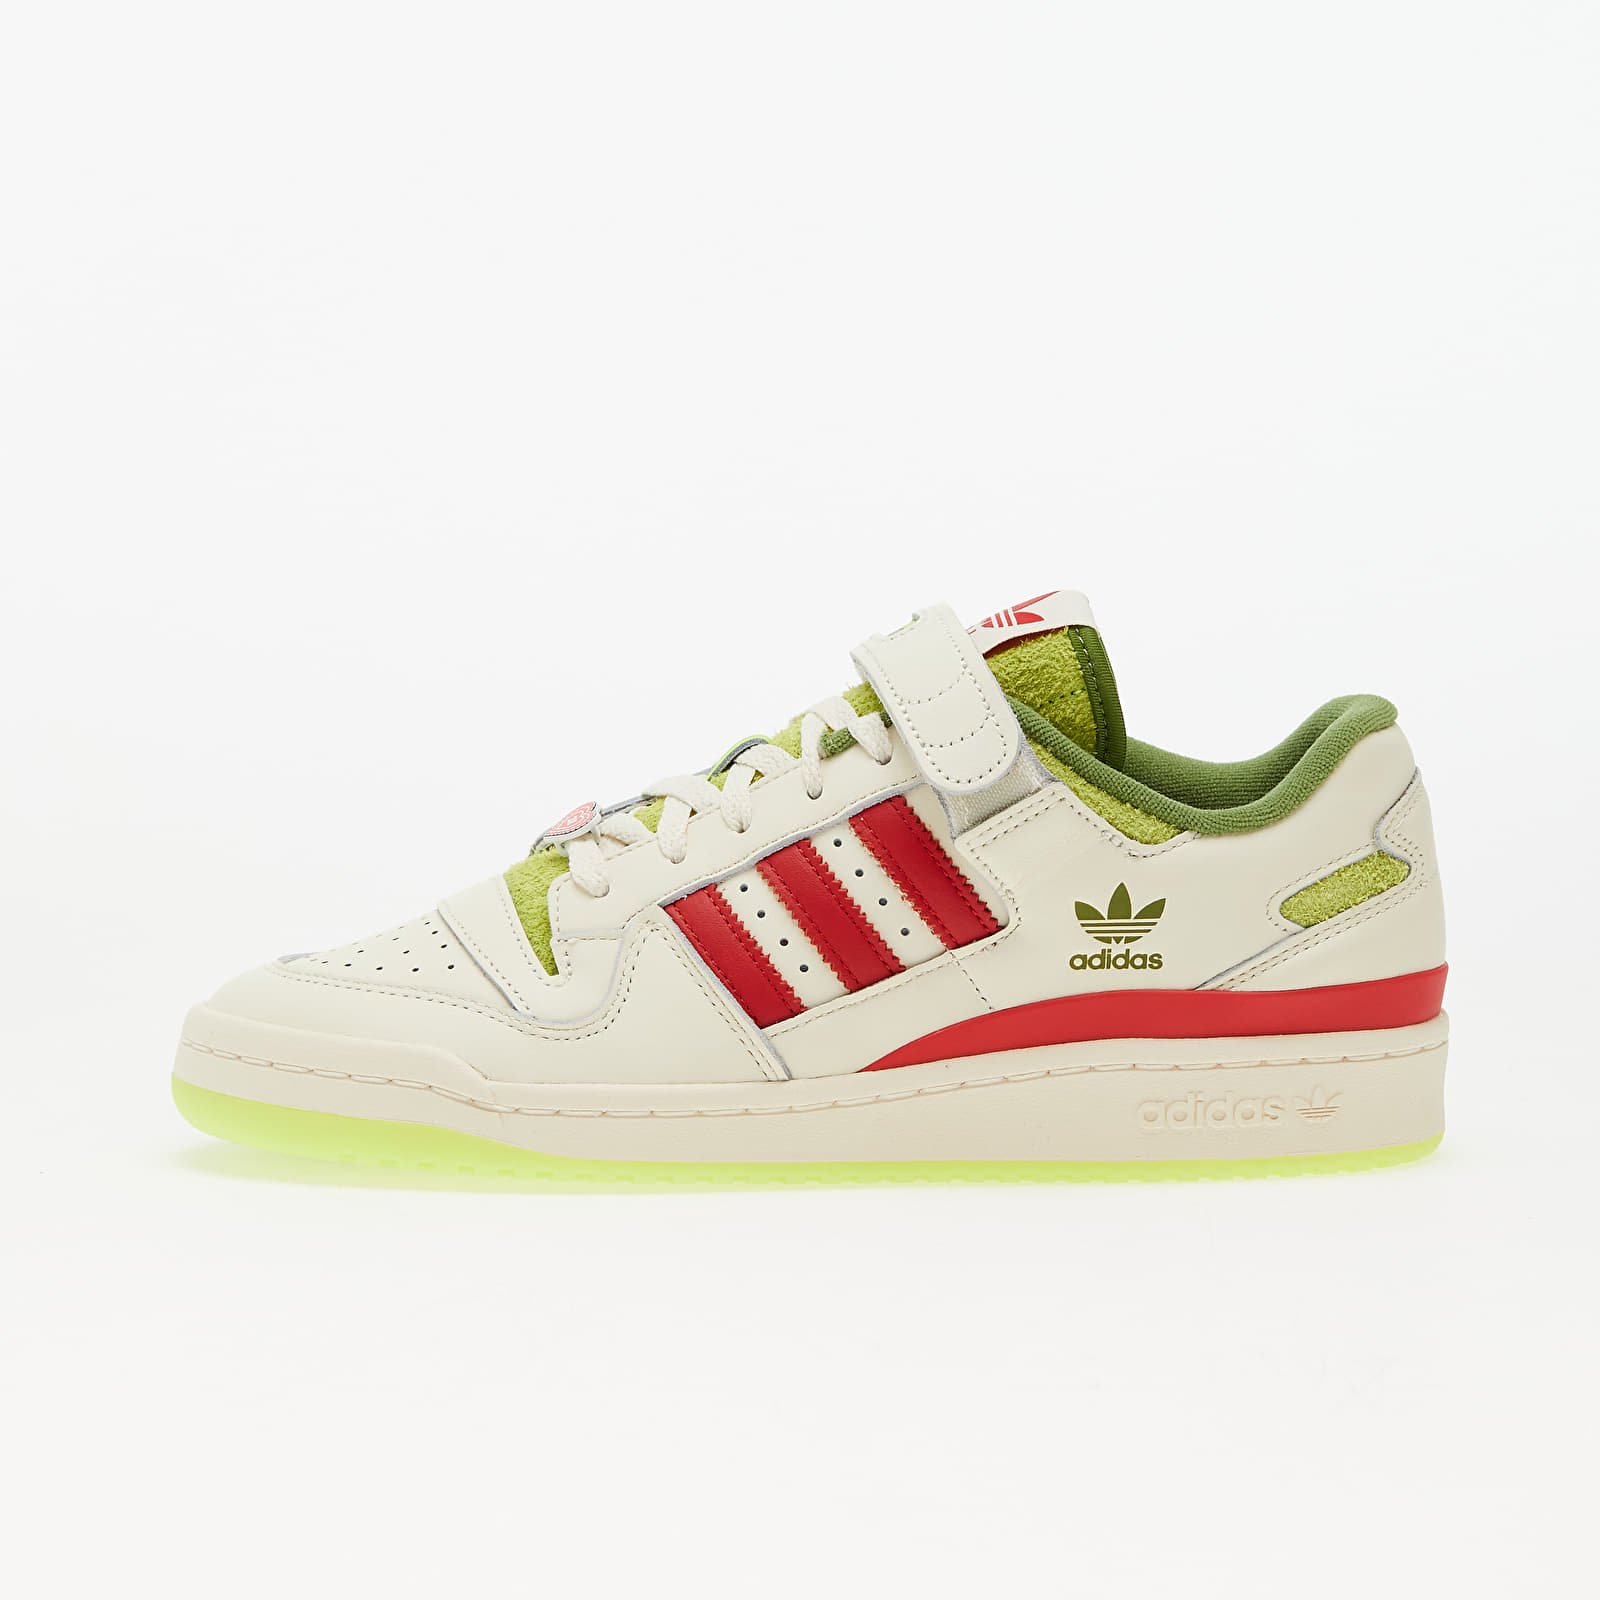 Men's shoes adidas x The Grinch Forum Low Core White/ Collegiate Red/ Solar Slime